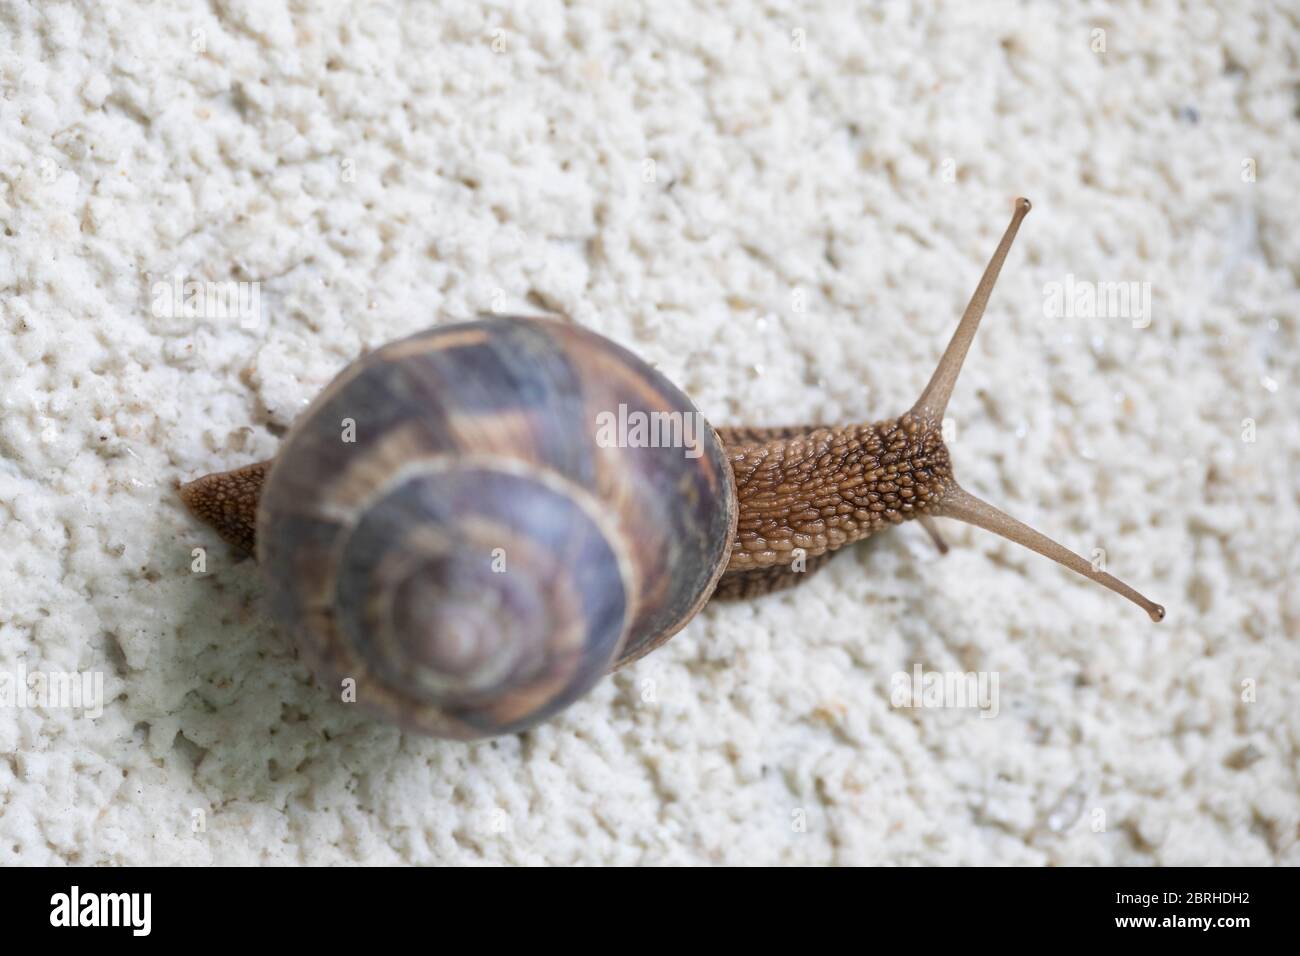 A close up of a snail on a white stone surface from a birds perspective Stock Photo